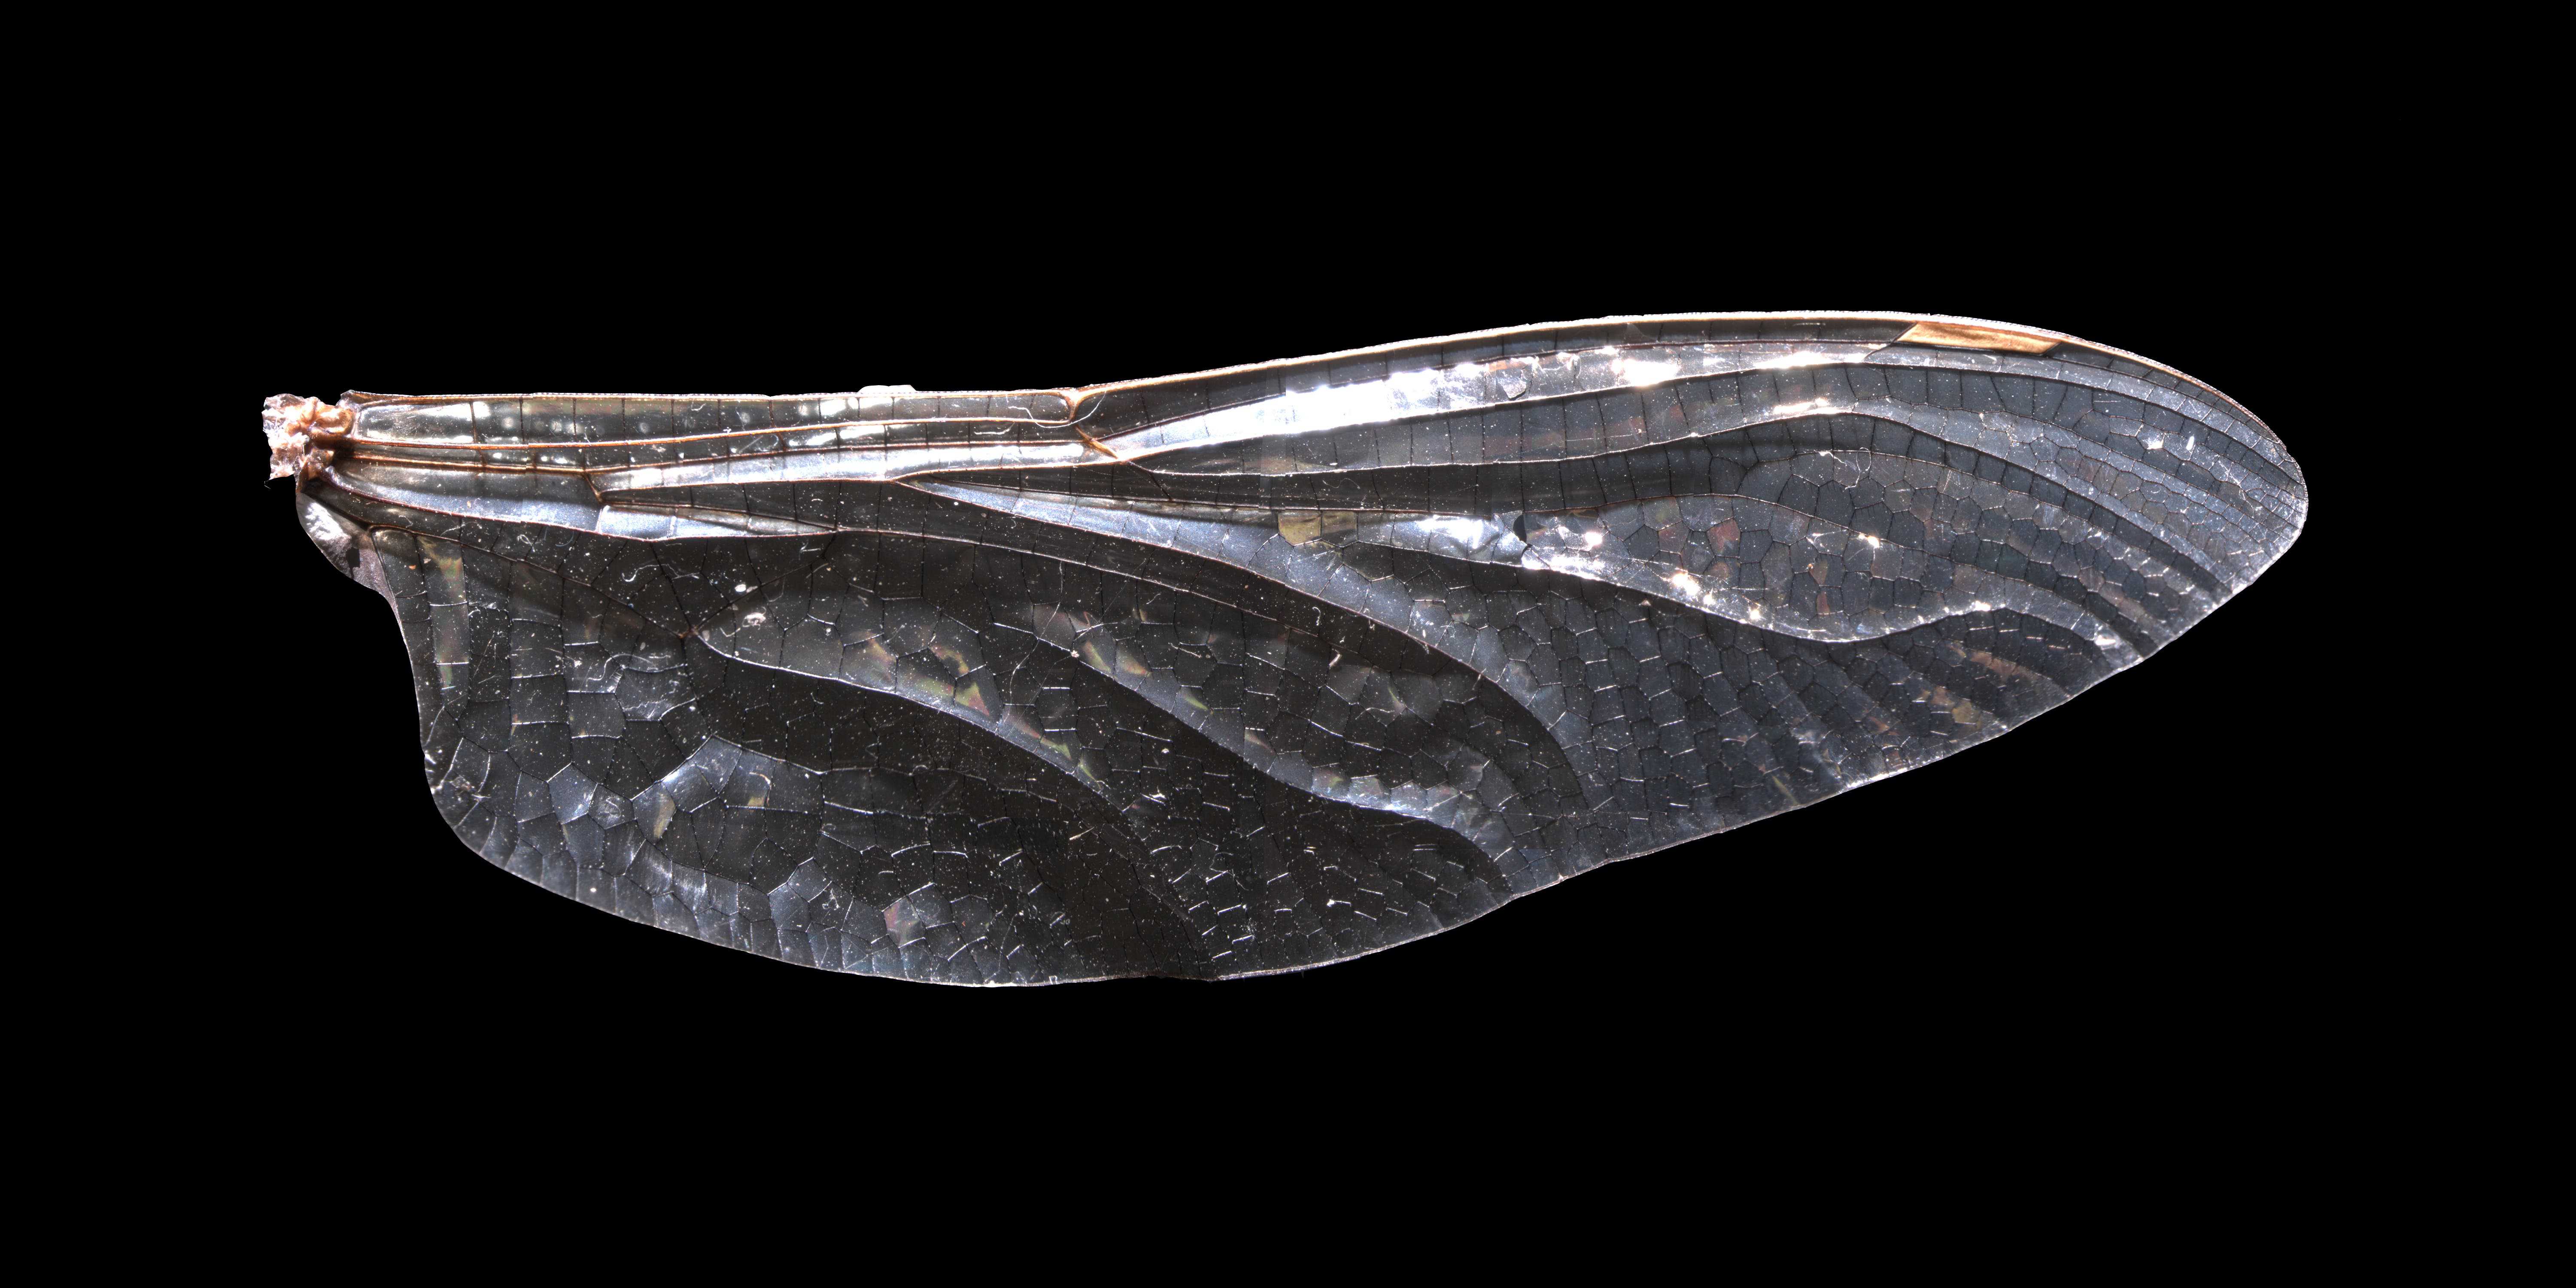 The hindwing of a dragonfly. Dragonflies are among a group of insect species that have a complex network of veins, partitioning the wing into hundreds or thousands of small, simple shapes. The shape and position of these secondary veins are endlessly variable, generating unique patterns on each individual wing. Image credits: Harvard University.